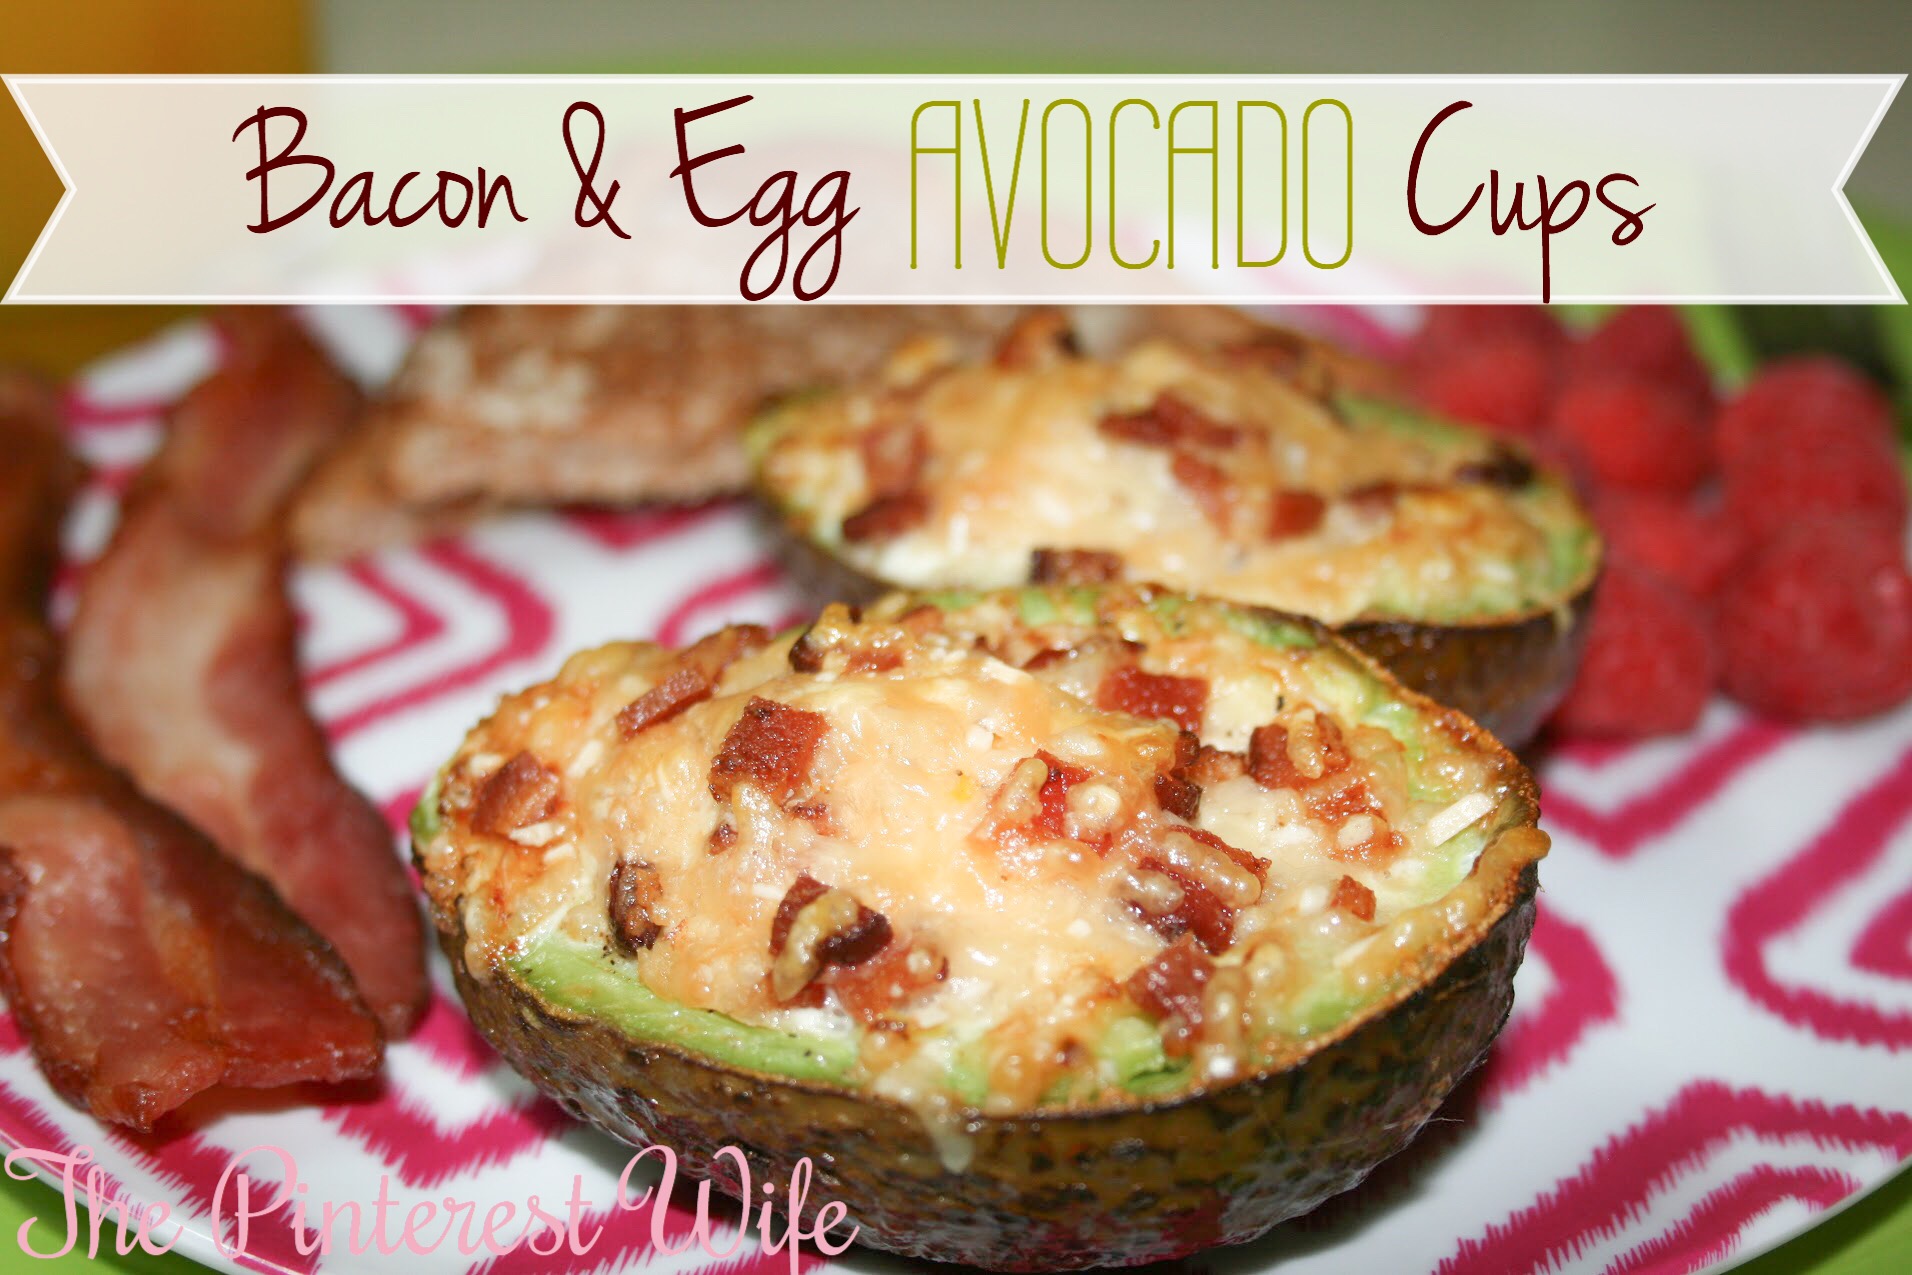 Bacon Avocado Cups with Balsamic Glaze - Primally Inspired